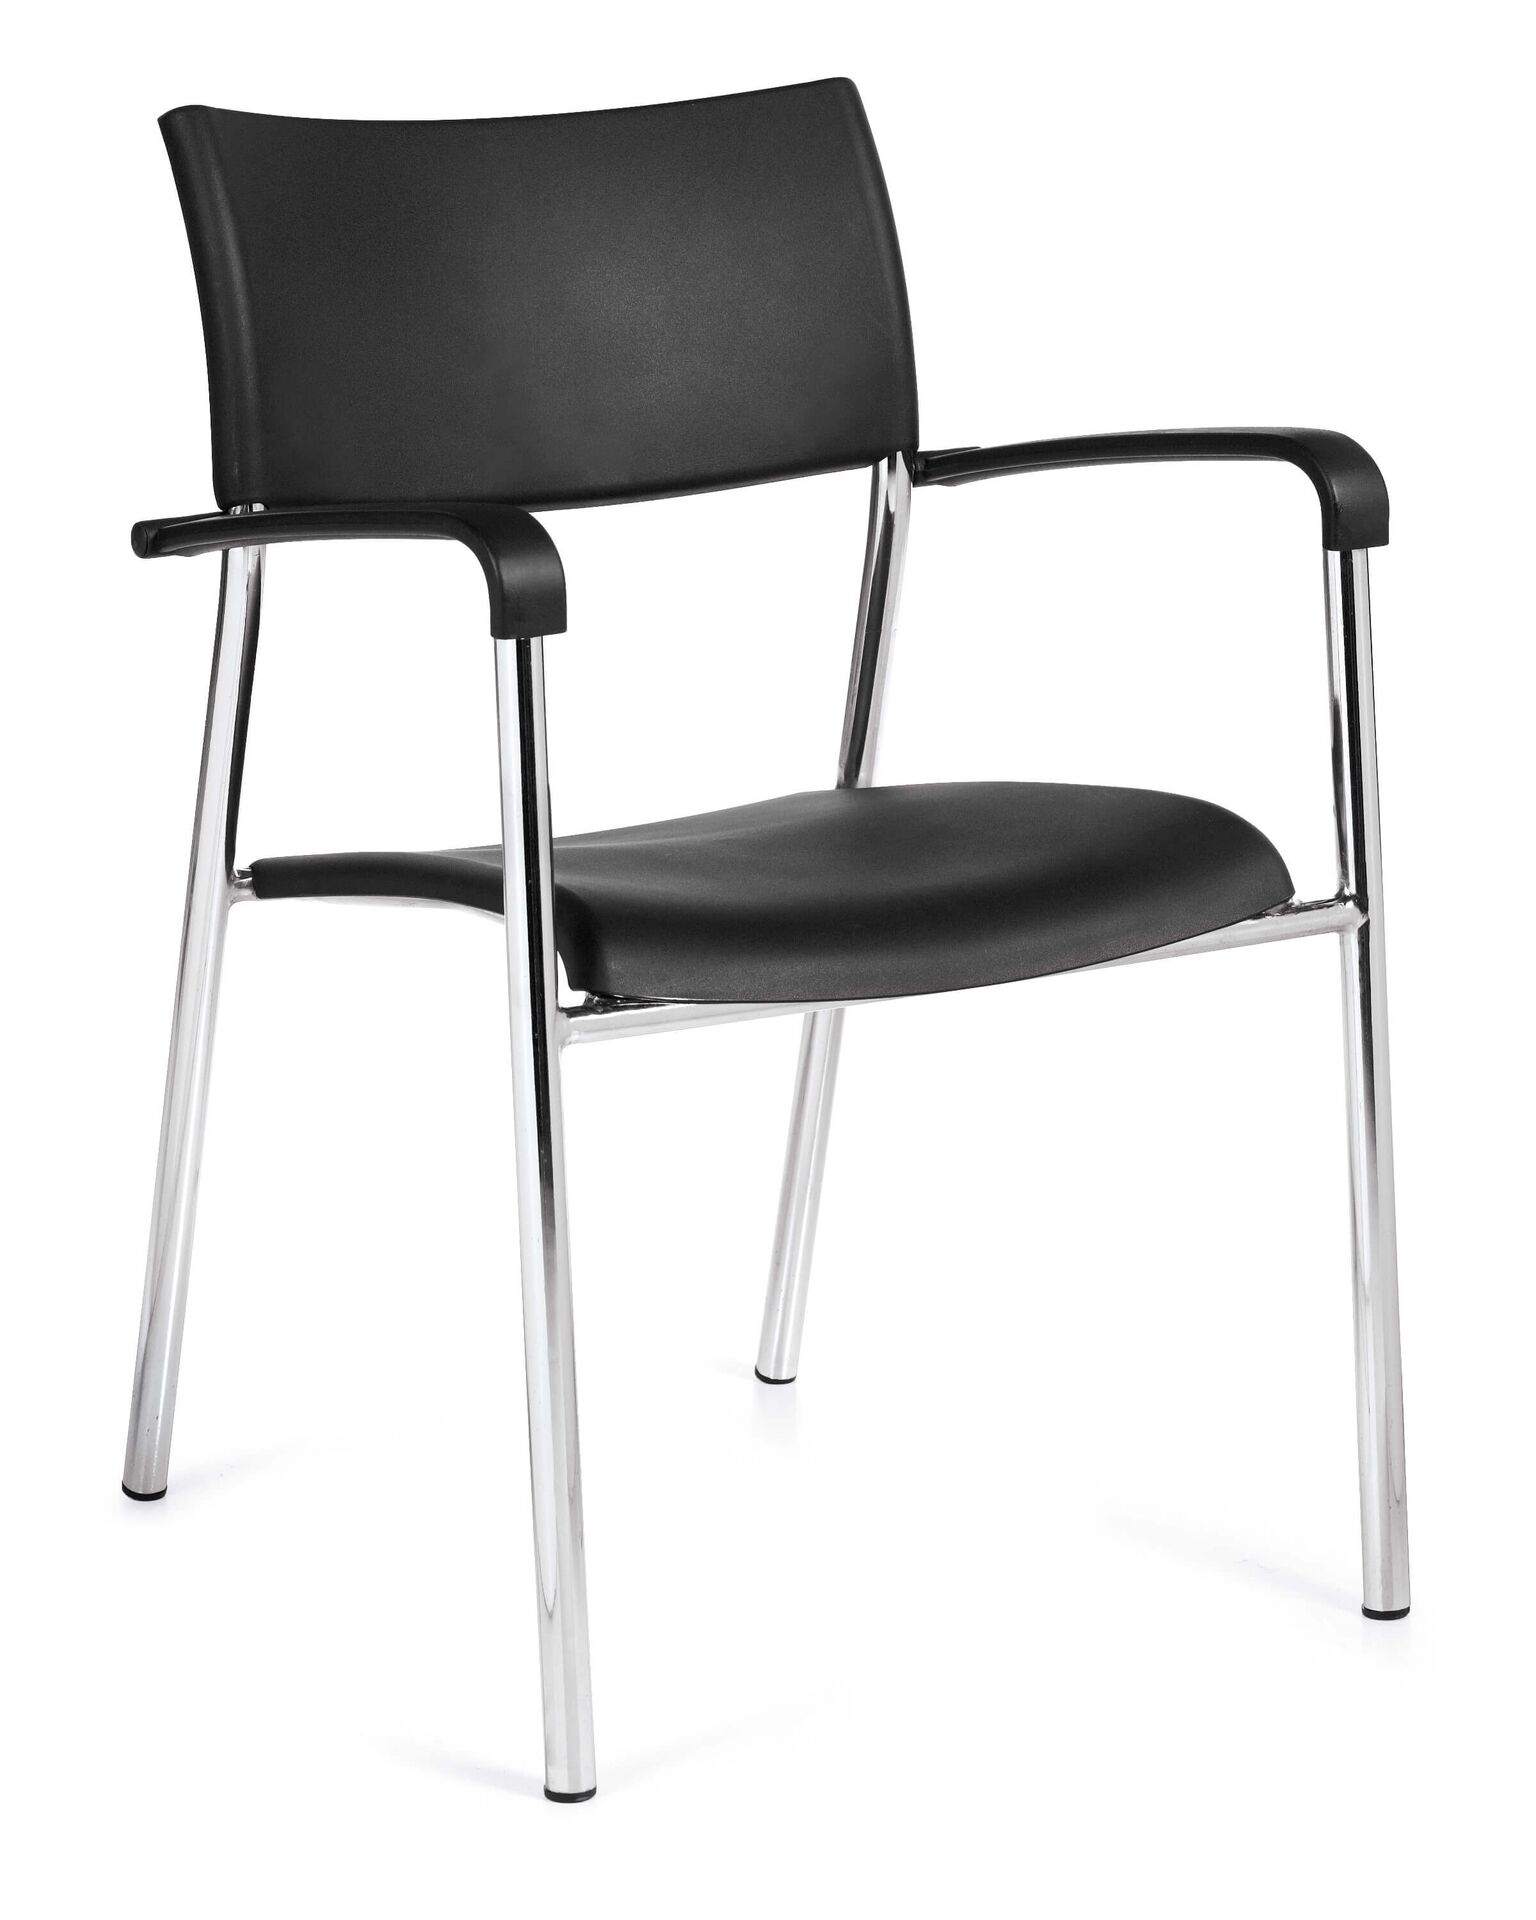 stackable-chairs-CUB-OTG1220B-GTO_preview.jpg